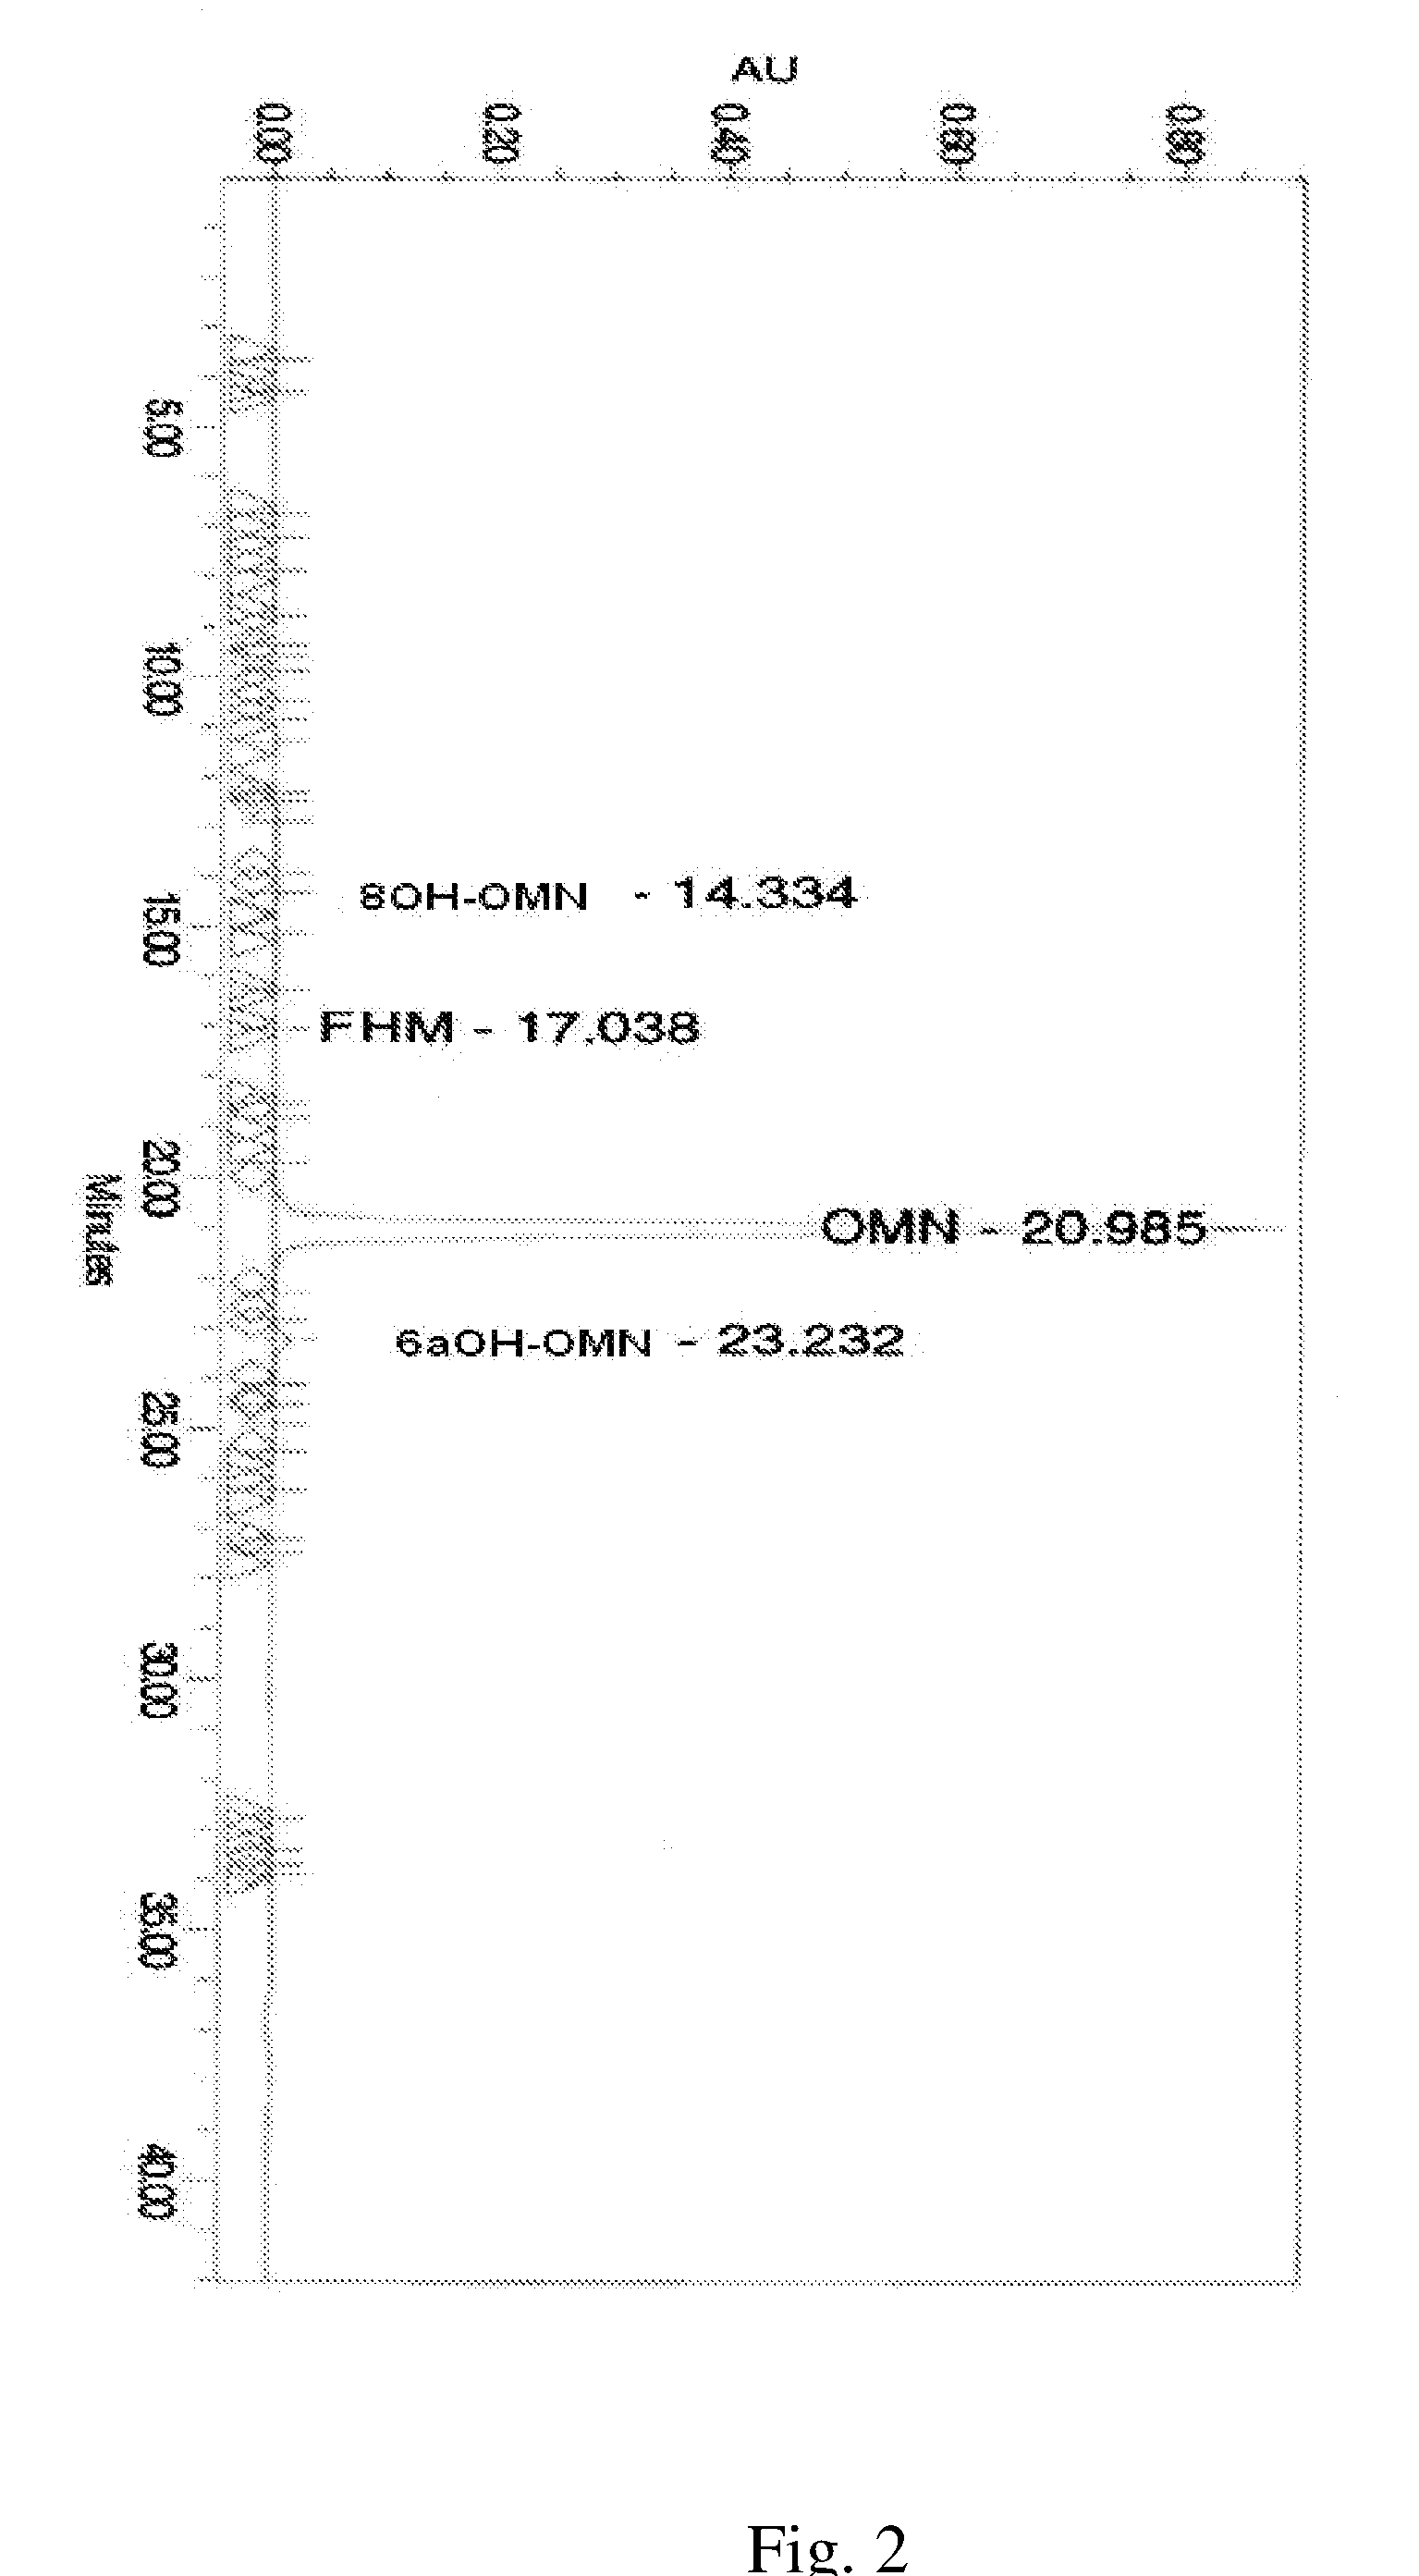 Process for improved oxymorphone synthesis